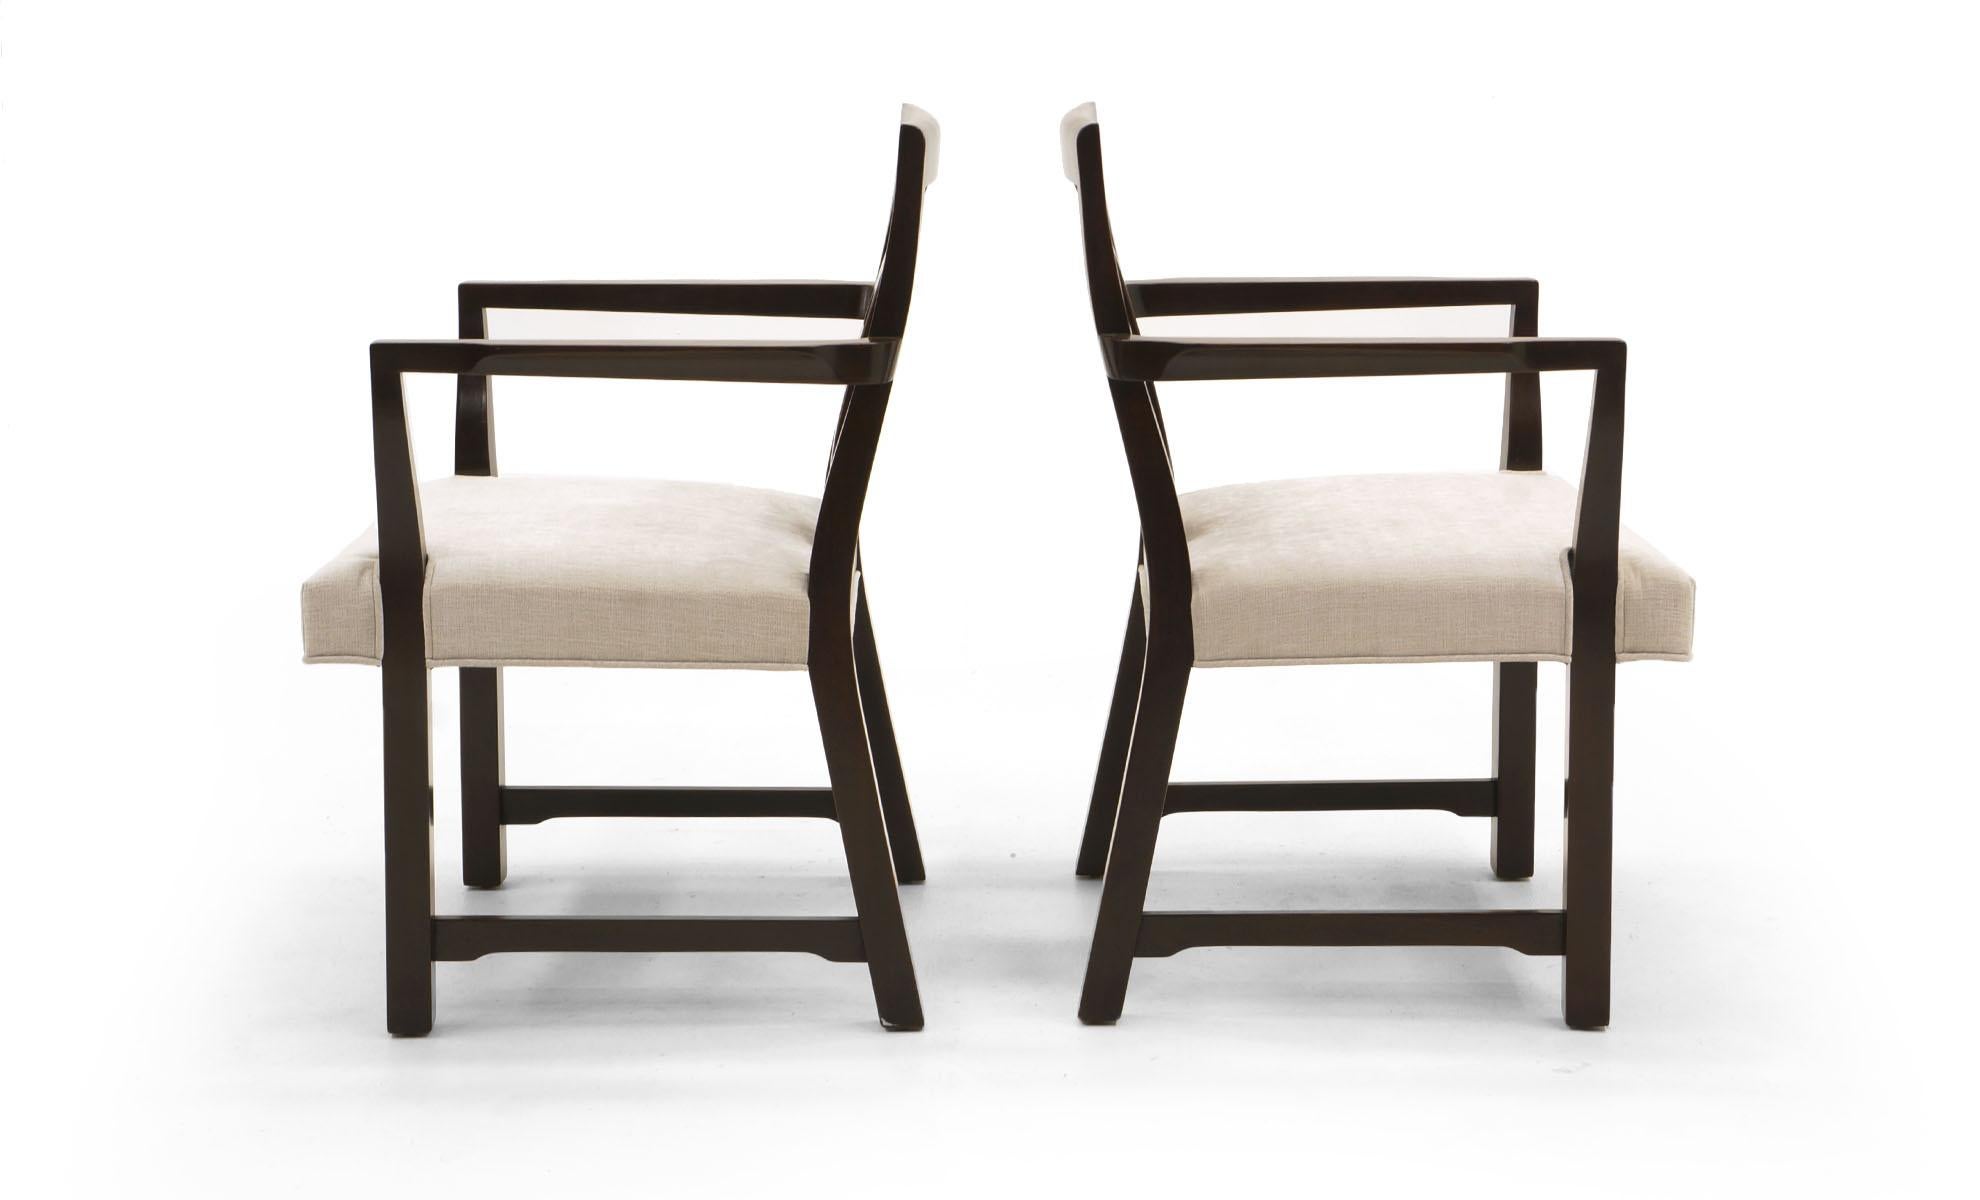 American Set of Eight Dining Chairs by Edward Wormley for Dunbar, New Knoll Upholstery